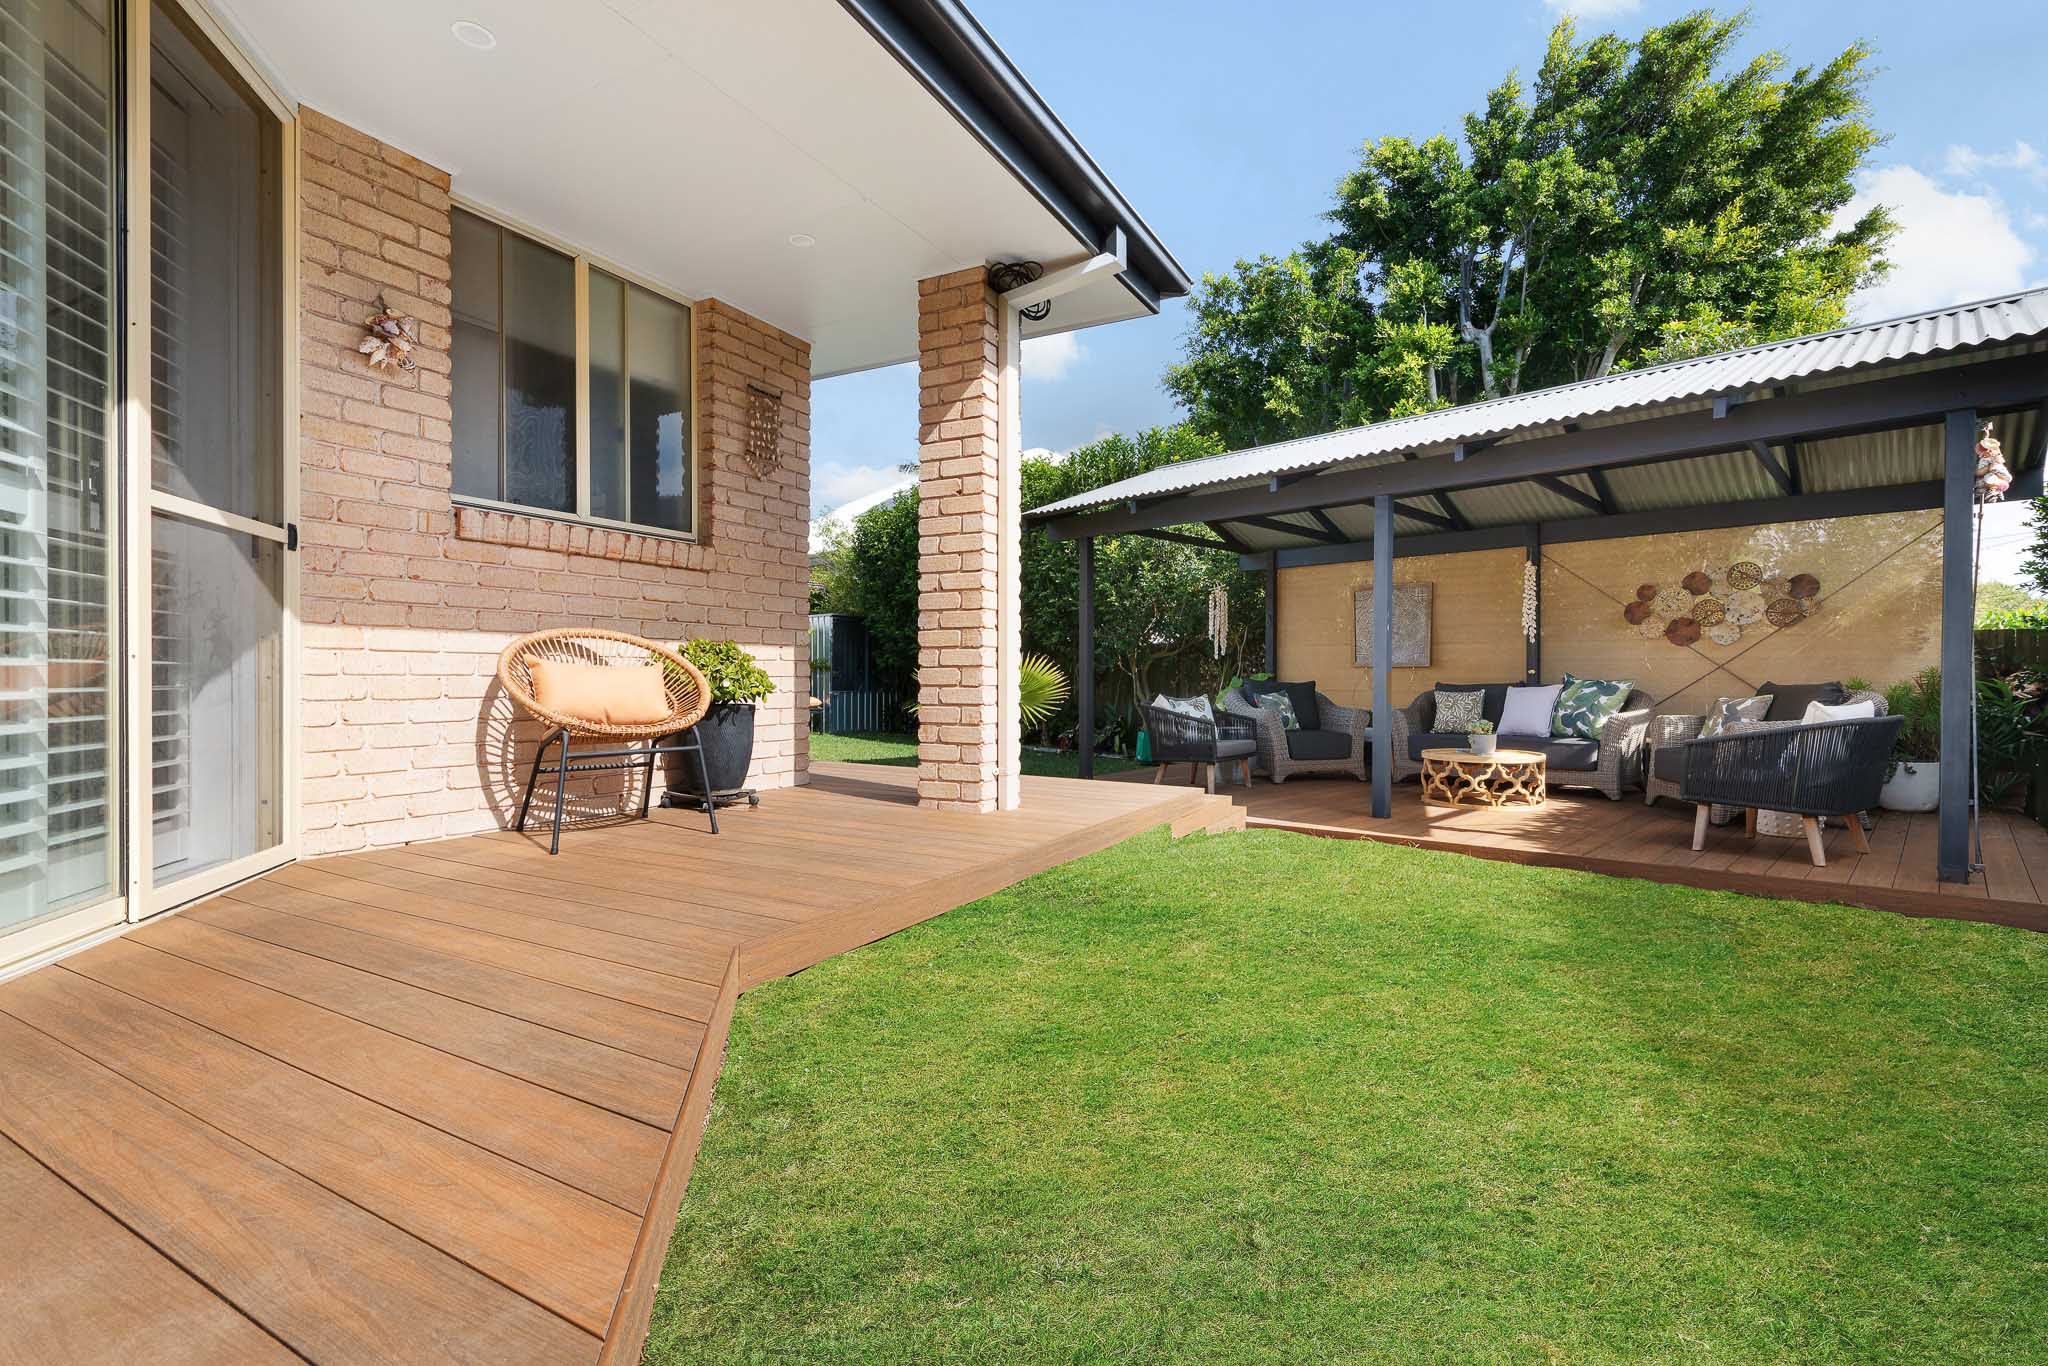 A small section of a patio built with Teak composite decking boards, next to a green lawn